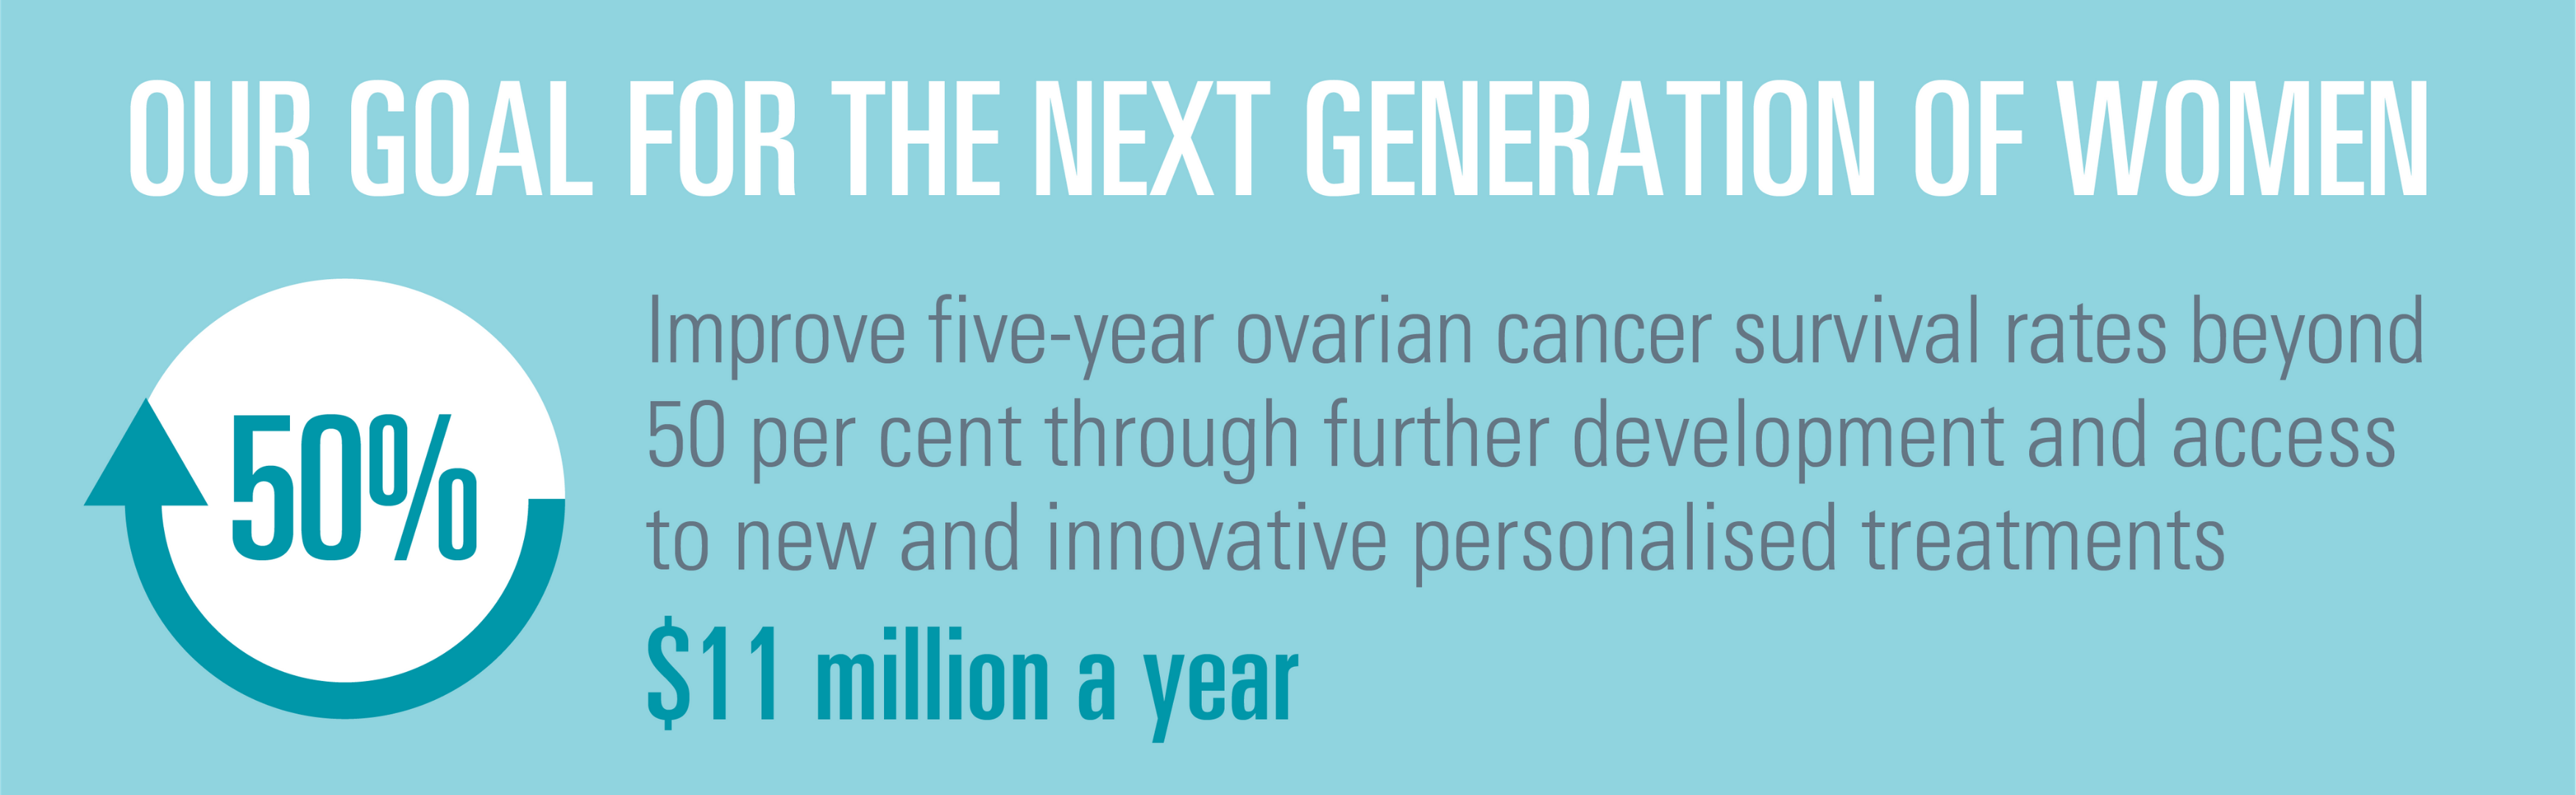 Image outlining goal 2: improve five-year ovarian cancer survival rates beyond 50 per cent through further development and access to new and innovative personalised treatments. $11 million a year.